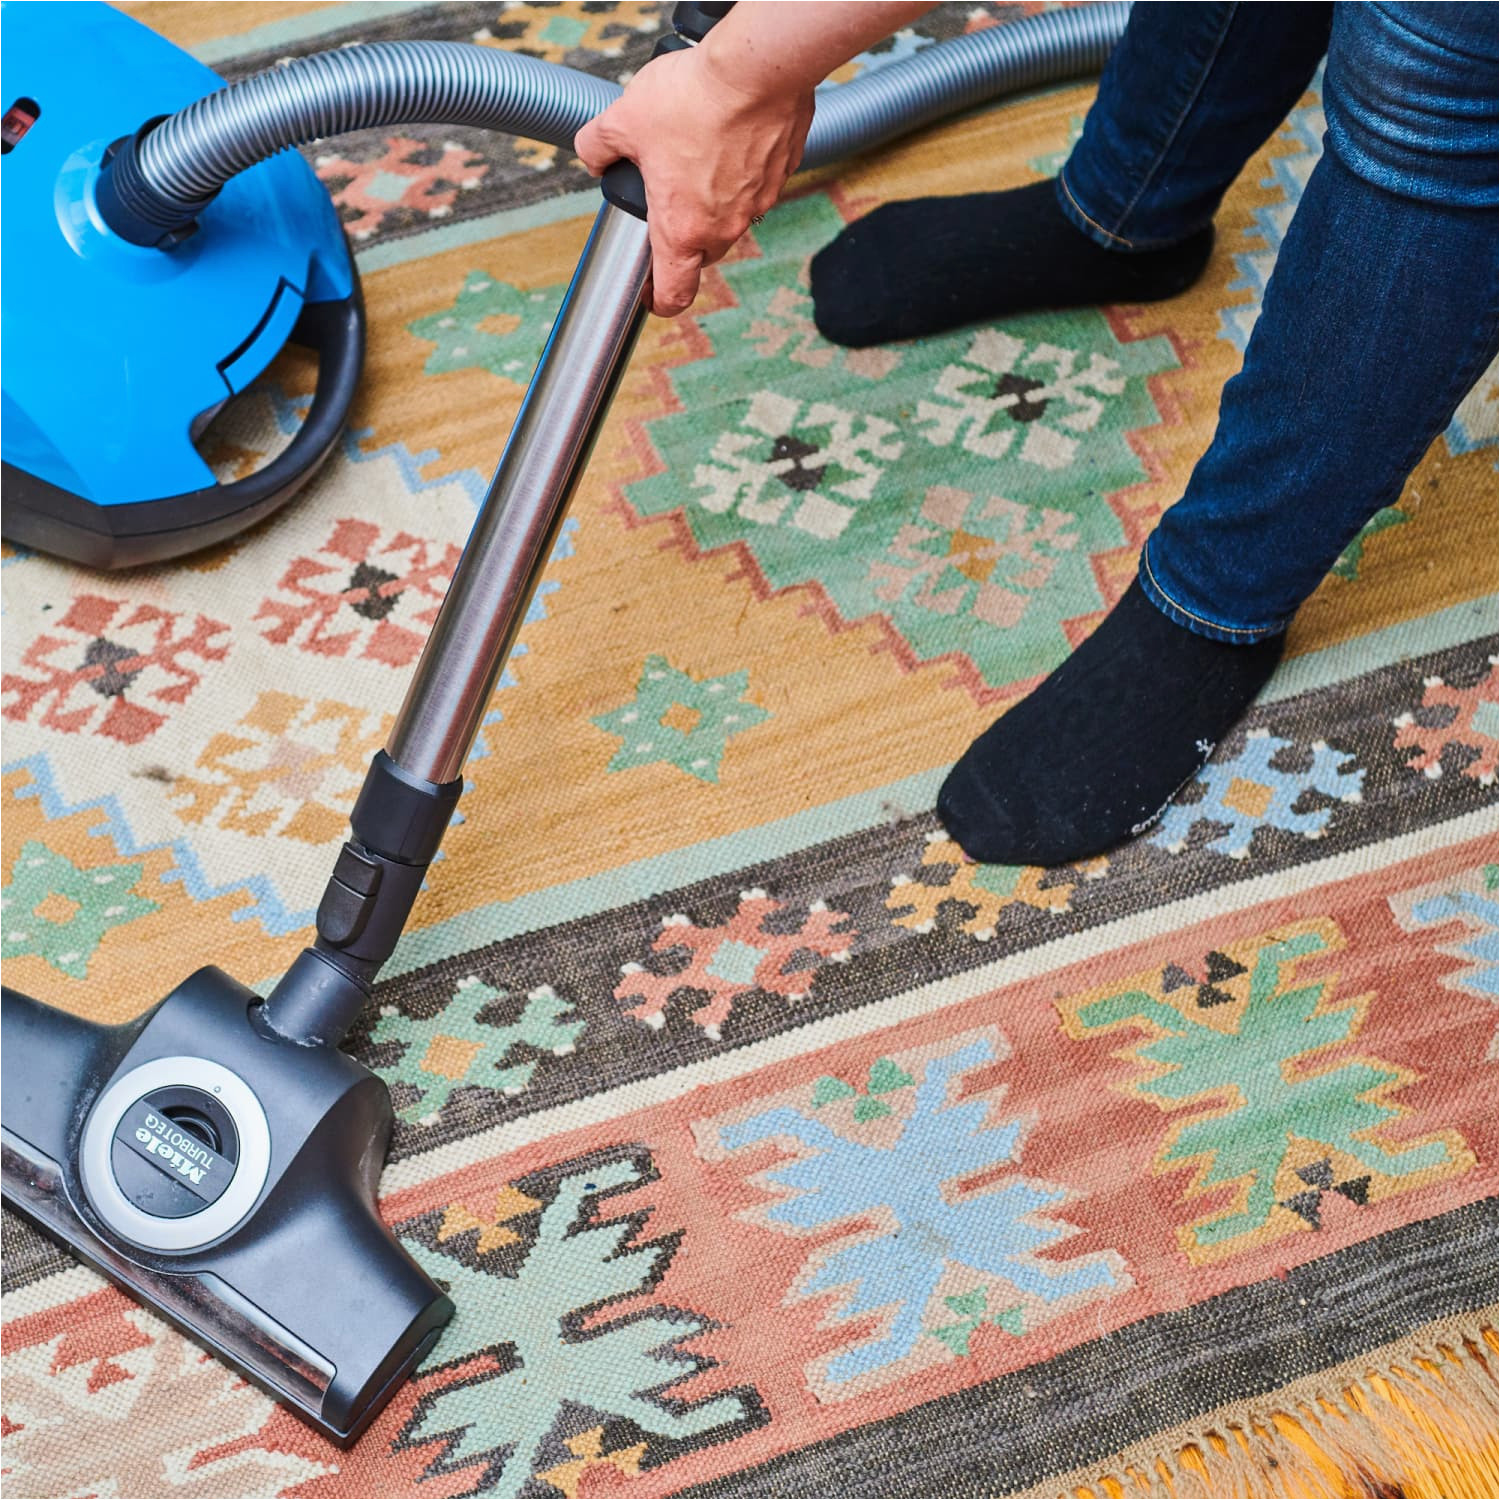 Do Dry Cleaners Clean area Rugs How to Clean A Rug – Step by Step with Photos Apartment therapy